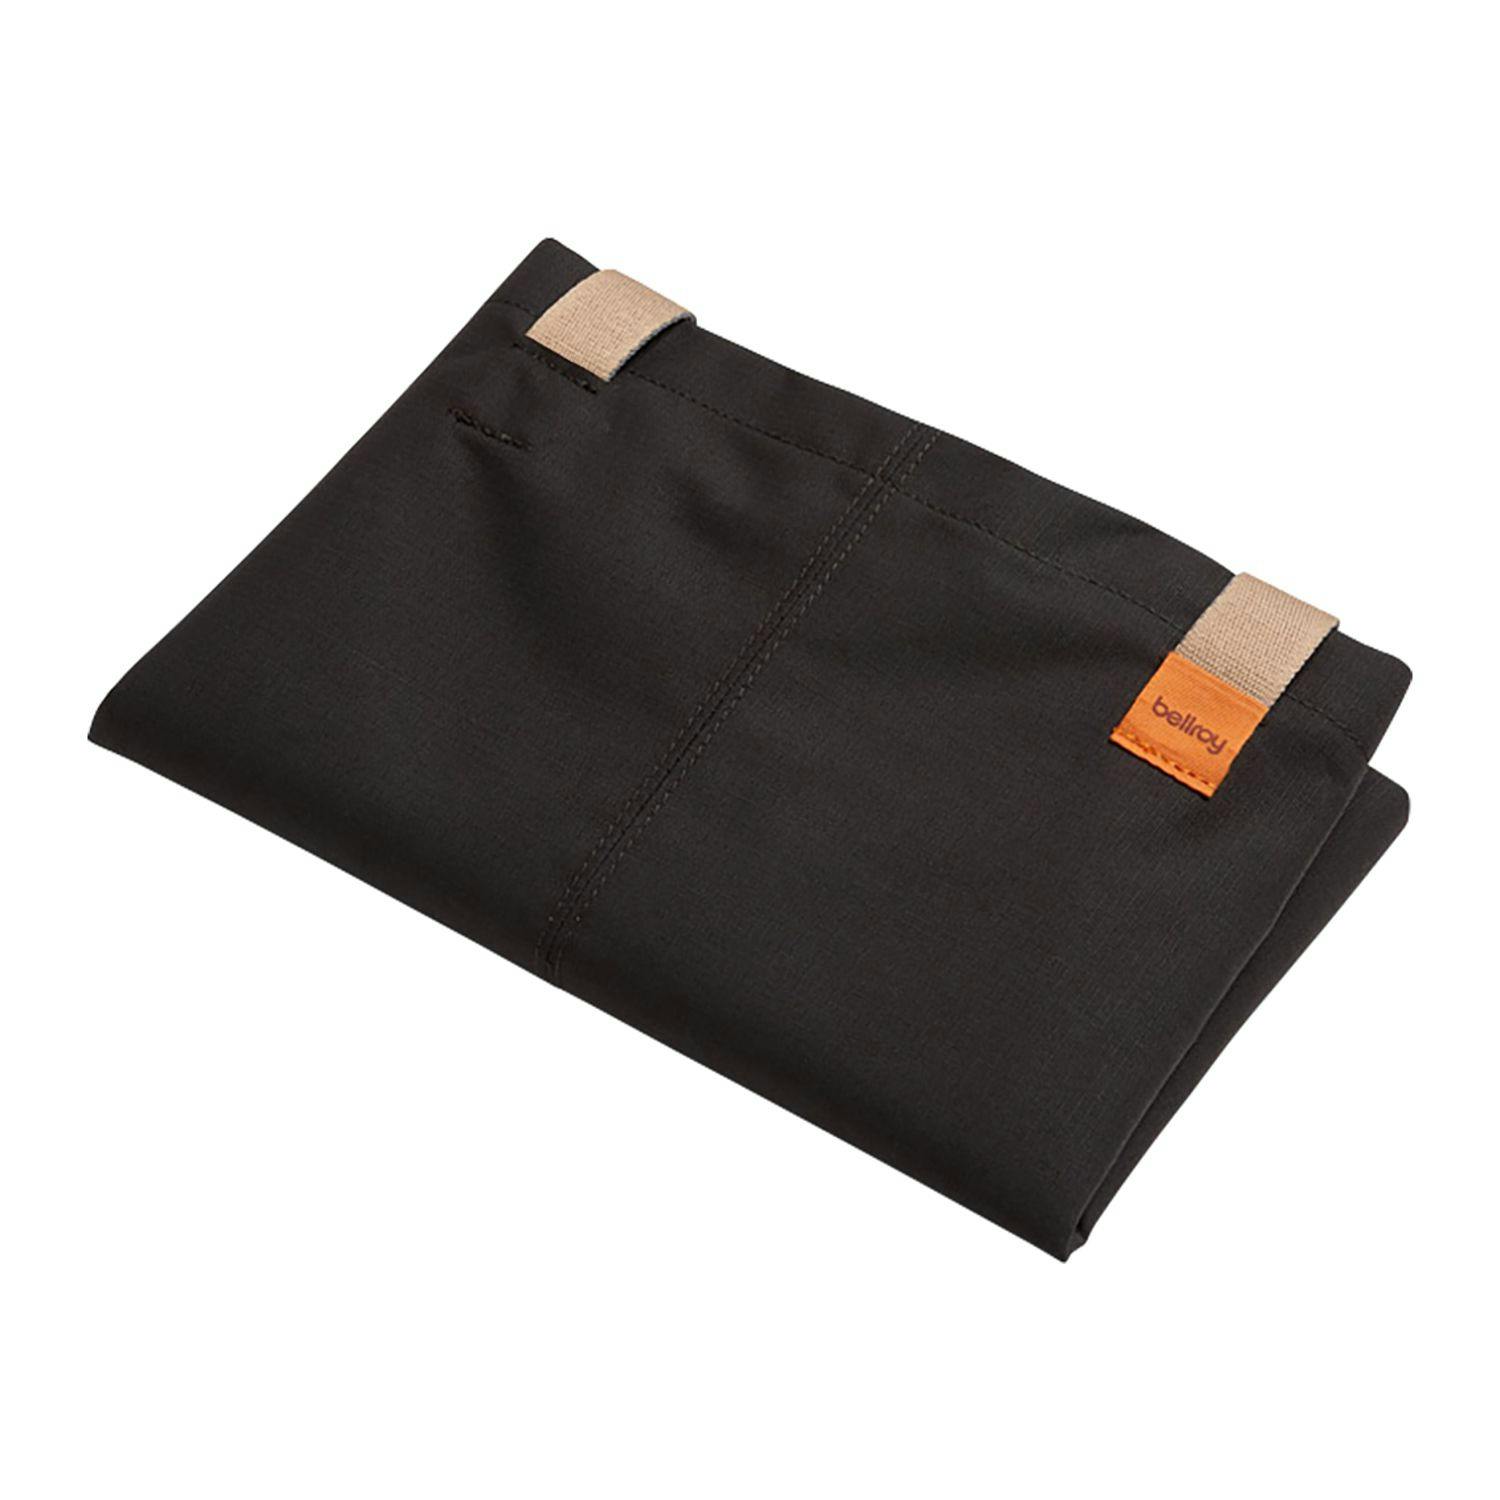 Bellroy Market Tote - additional Image 5